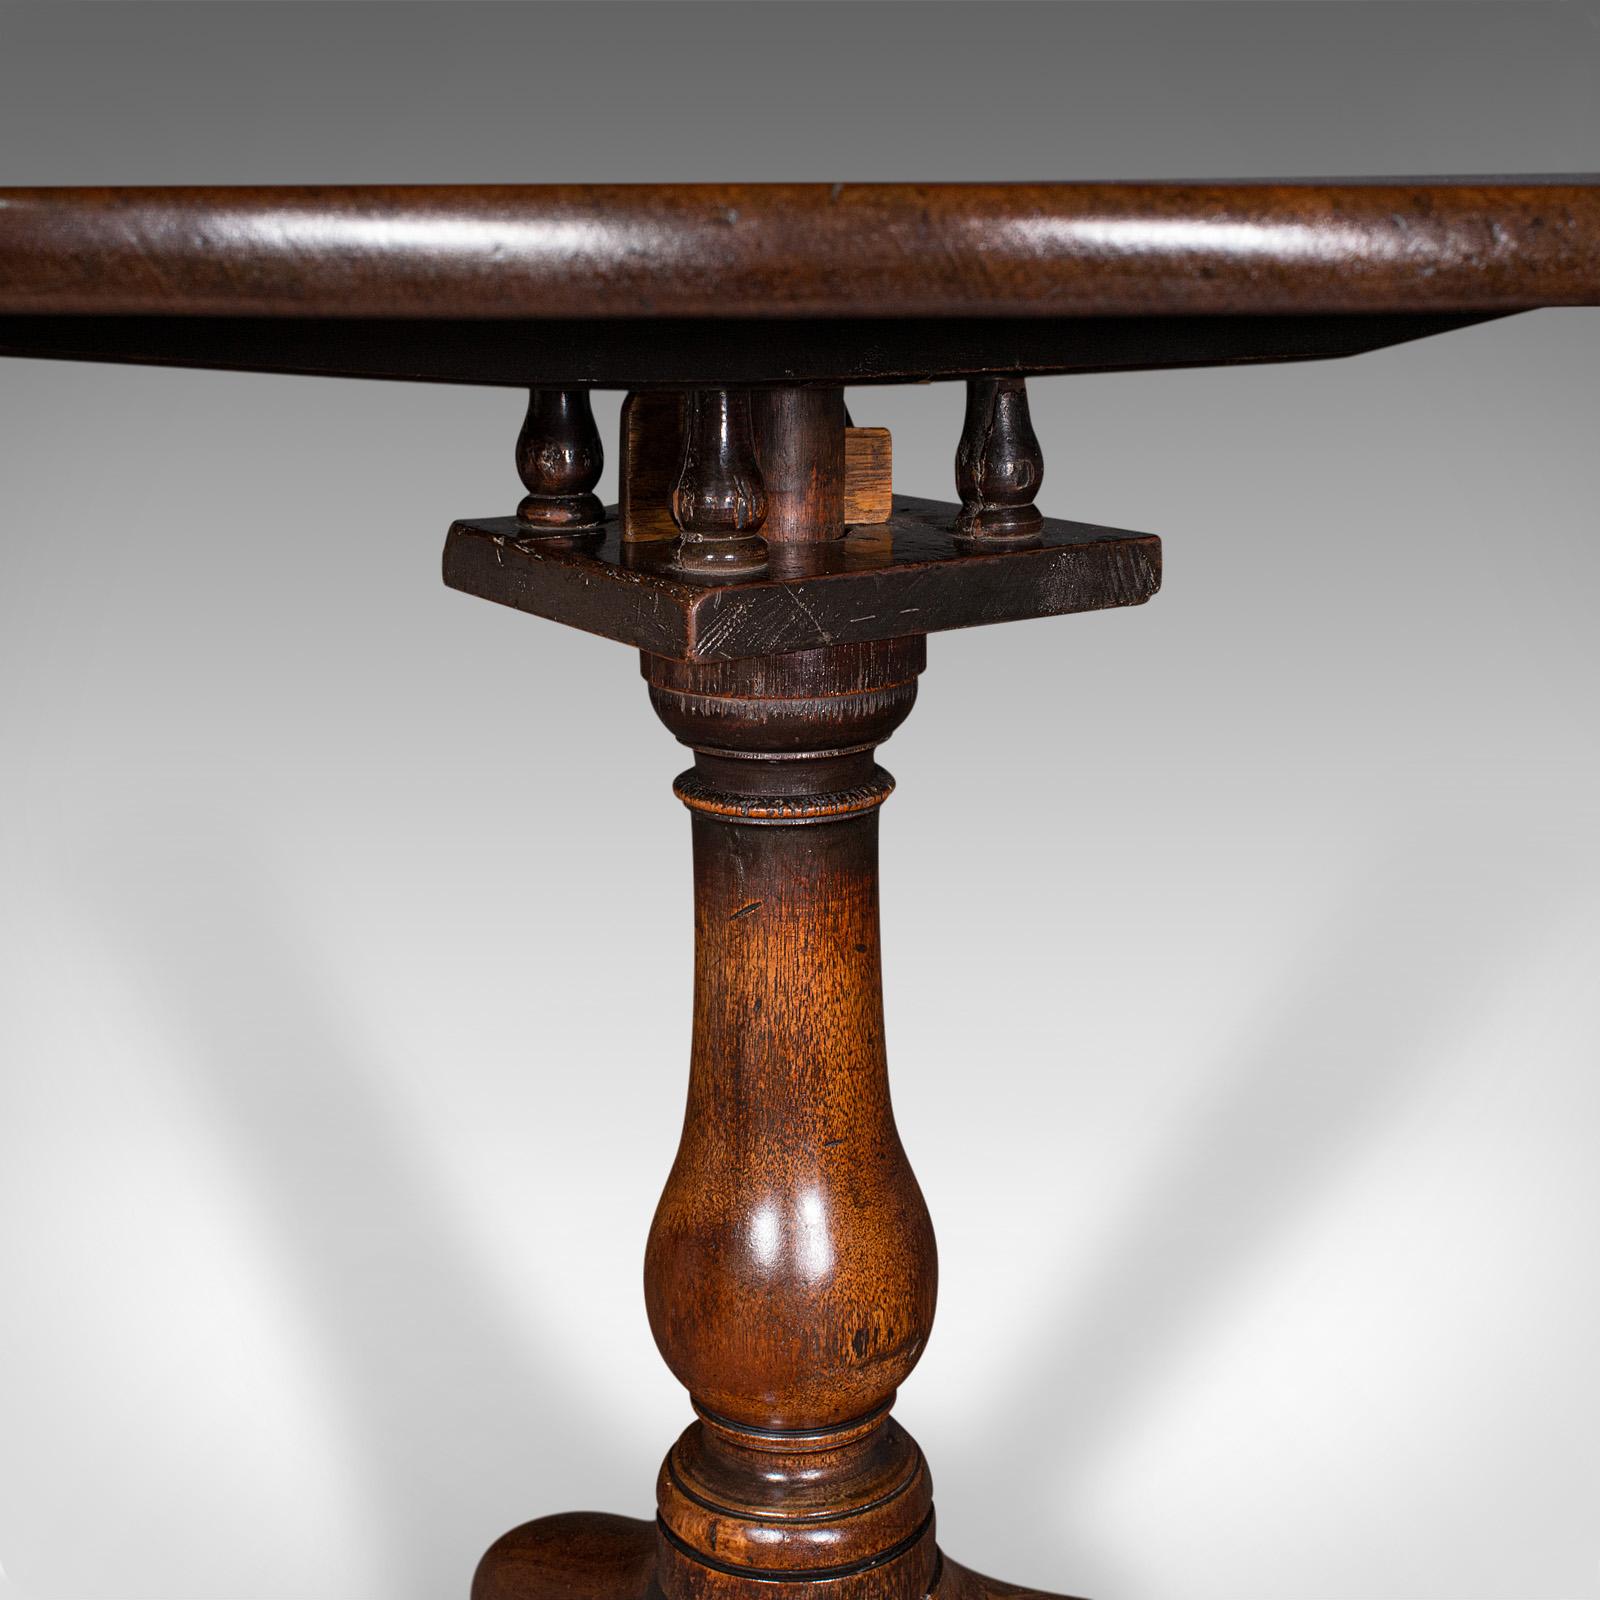 Antique Tilt Top Table, English, Mahogany, Side, Lamp, Rotary, Georgian, C.1760 For Sale 4